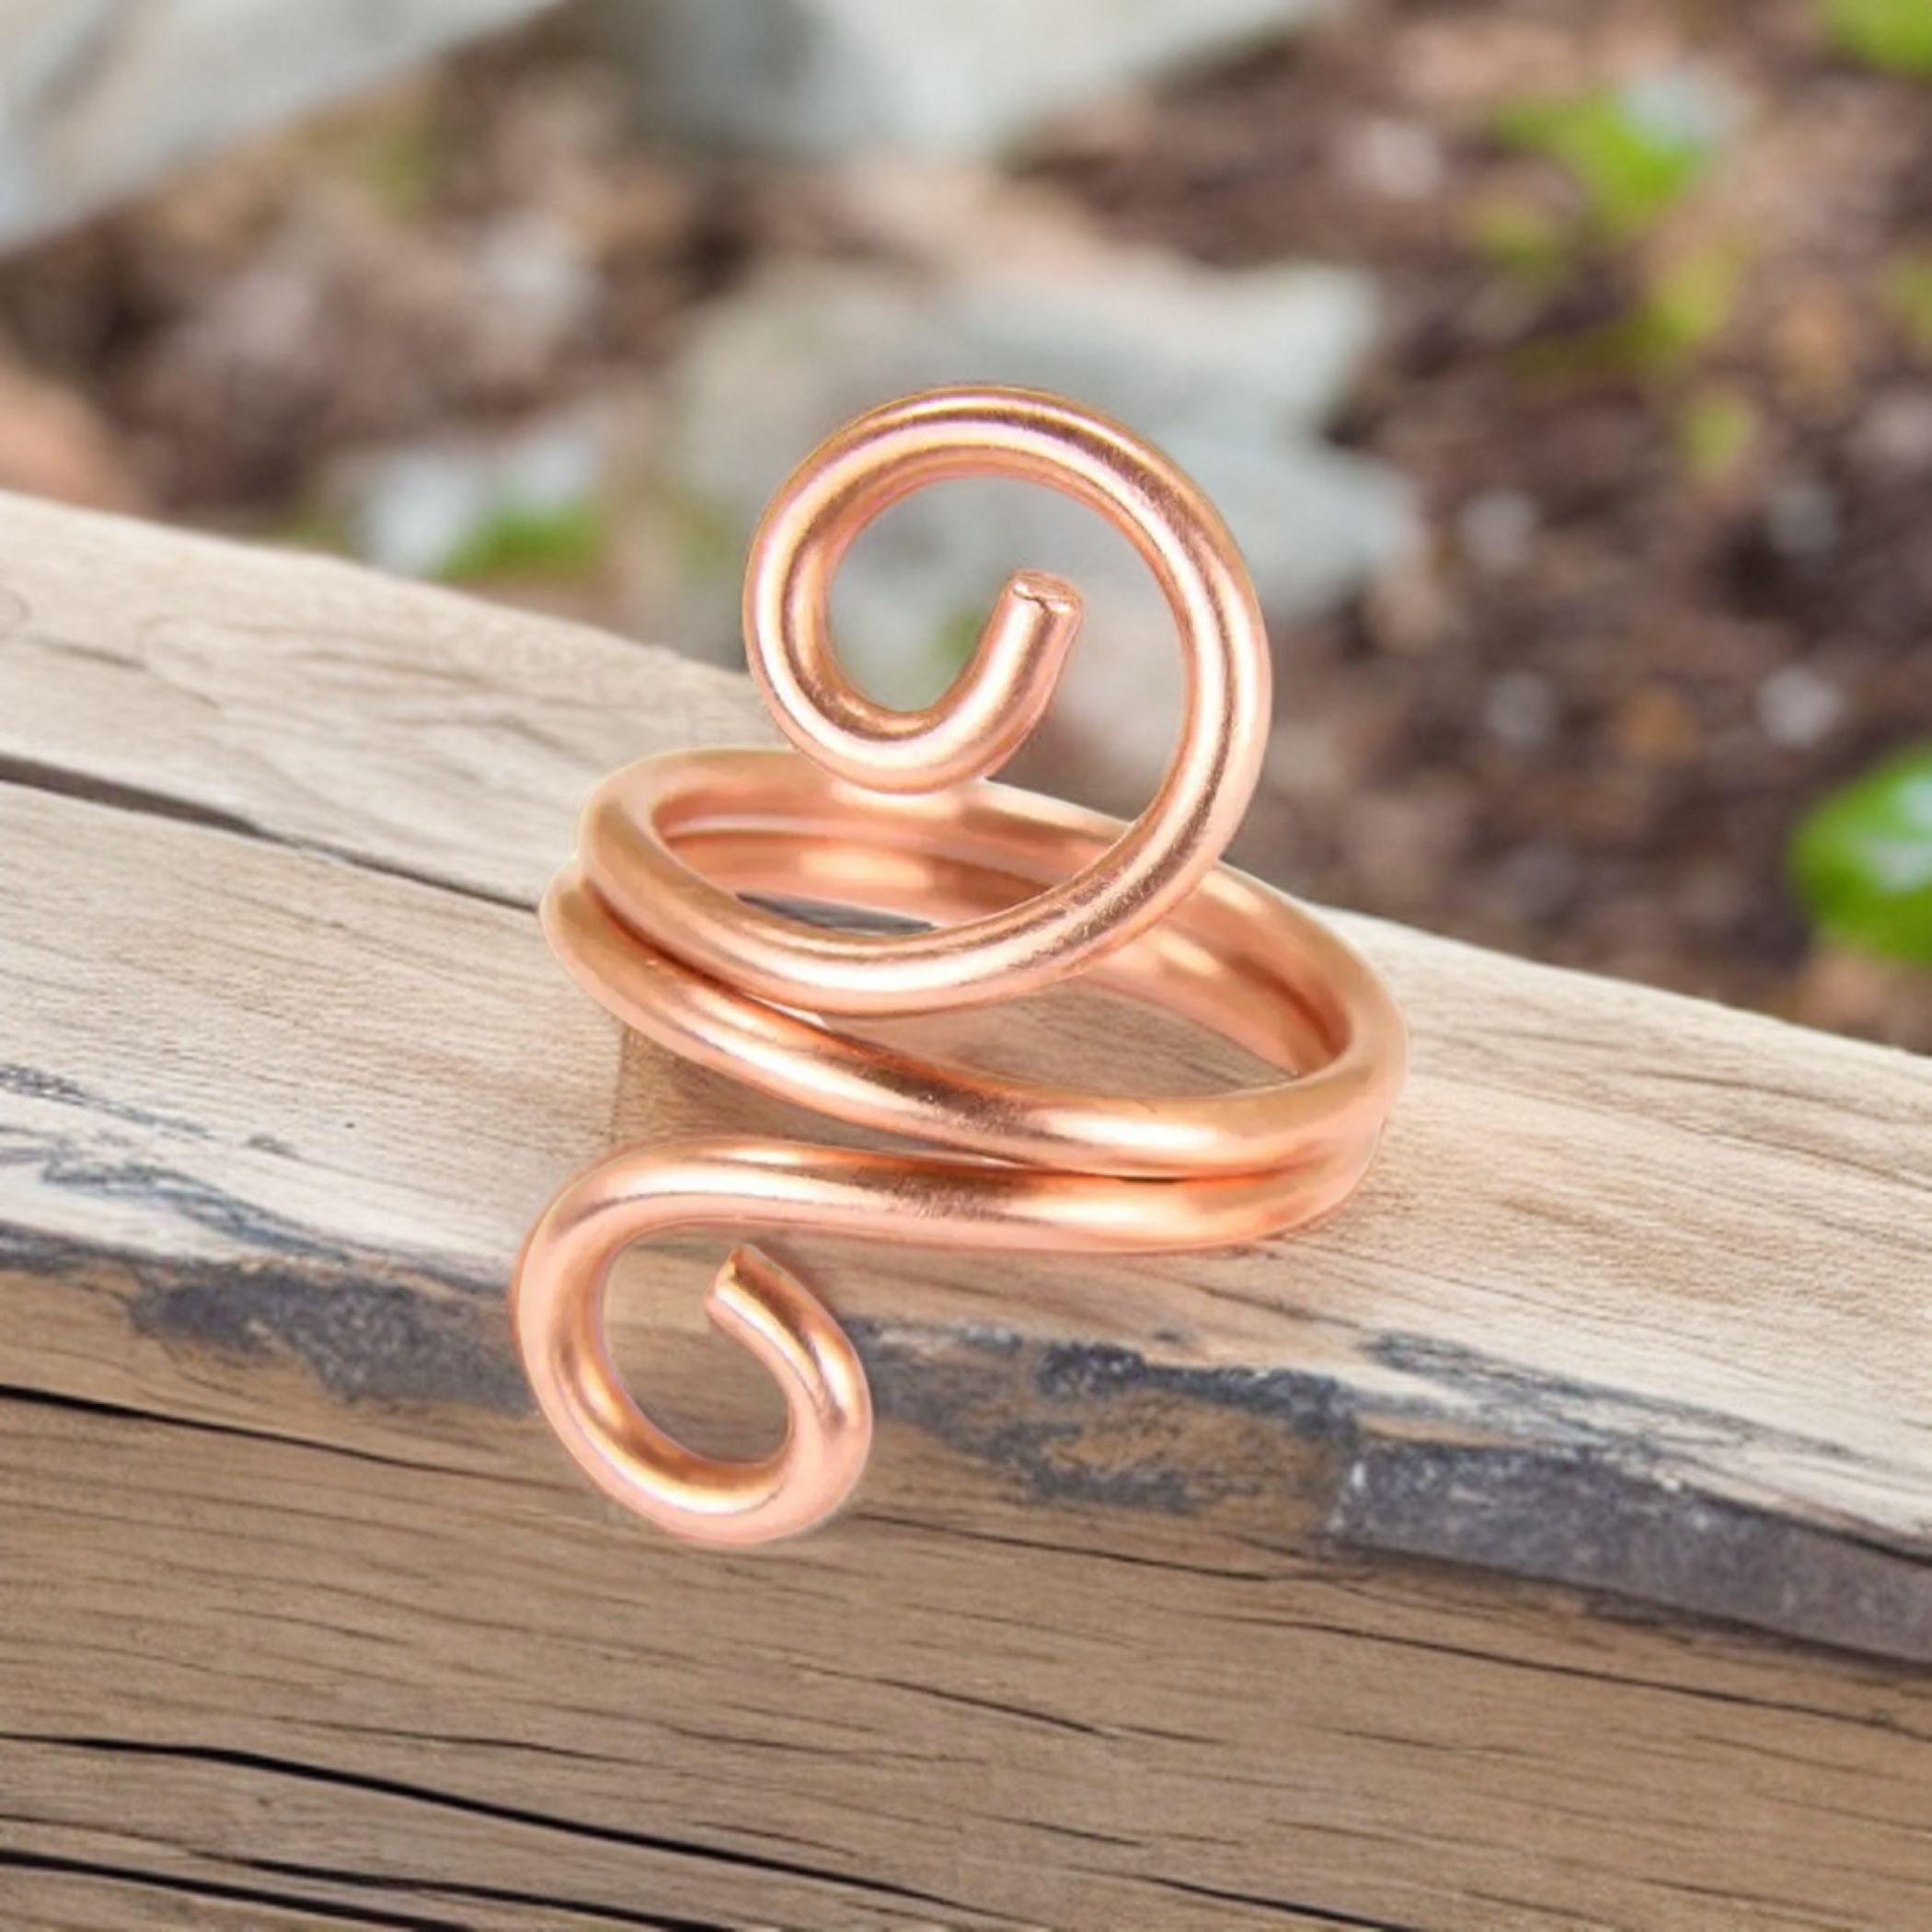 adjustable copper ring handmade in South Africa by upskilled artisans